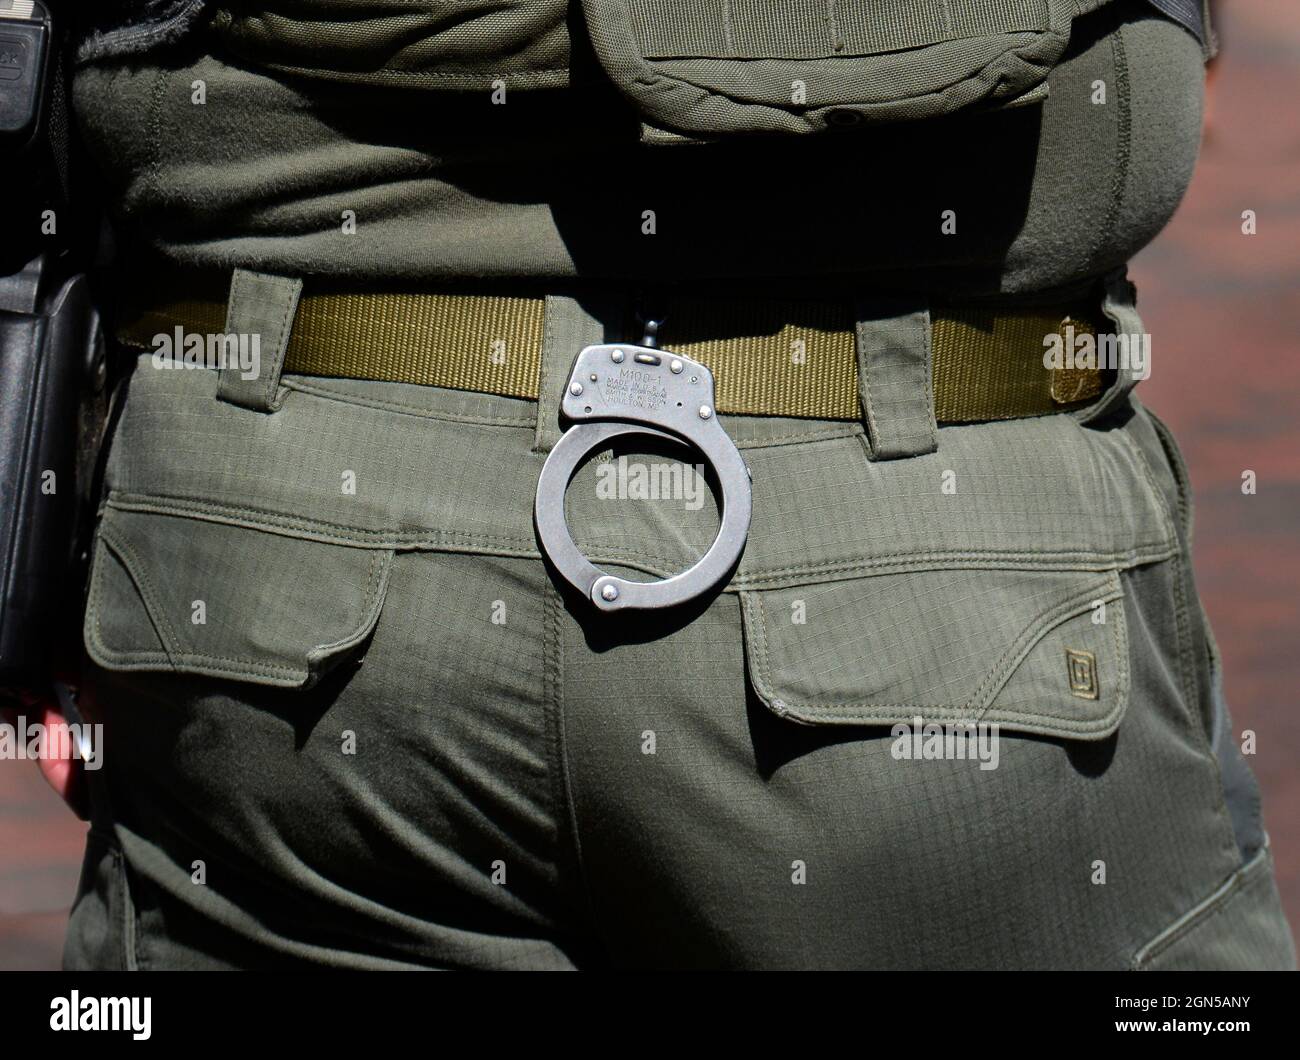 A pair of handcuffs hang from the belt of a member of the Santa Fe, New Mexico Police Department's SWAT team. Stock Photo